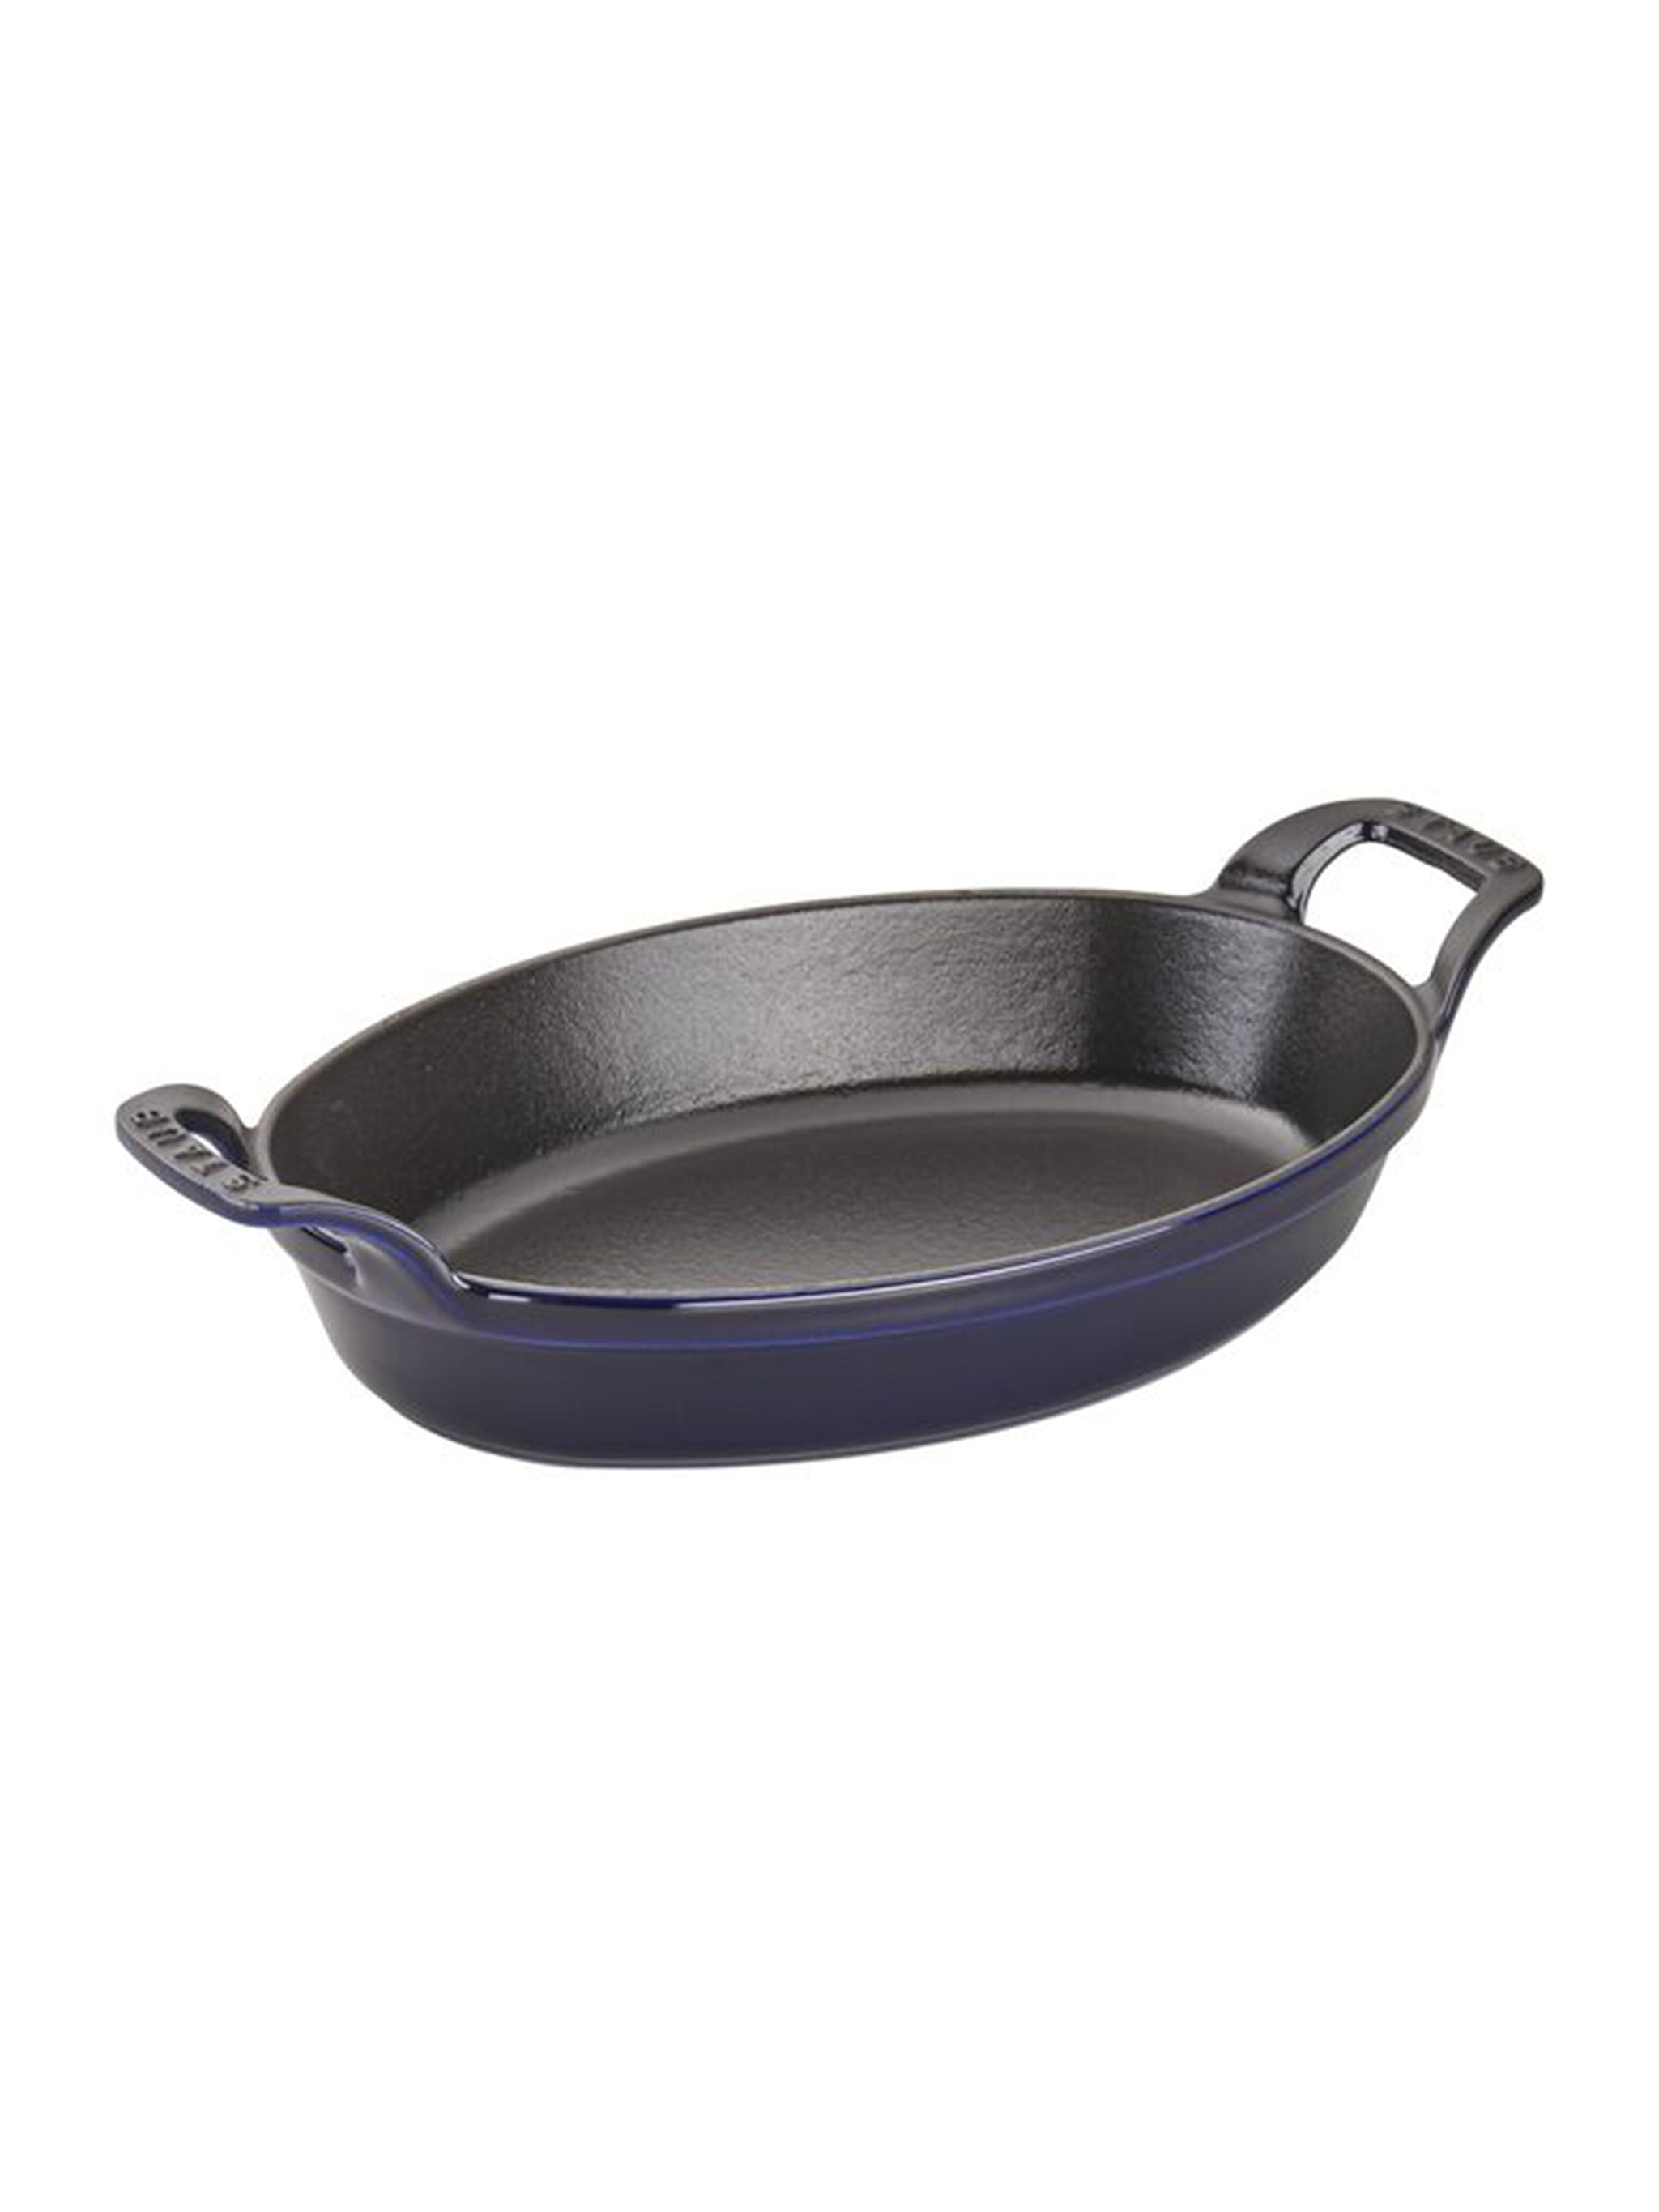 Buy Staub Cast Iron - Baking Dishes & Roasters Oven dish with lid